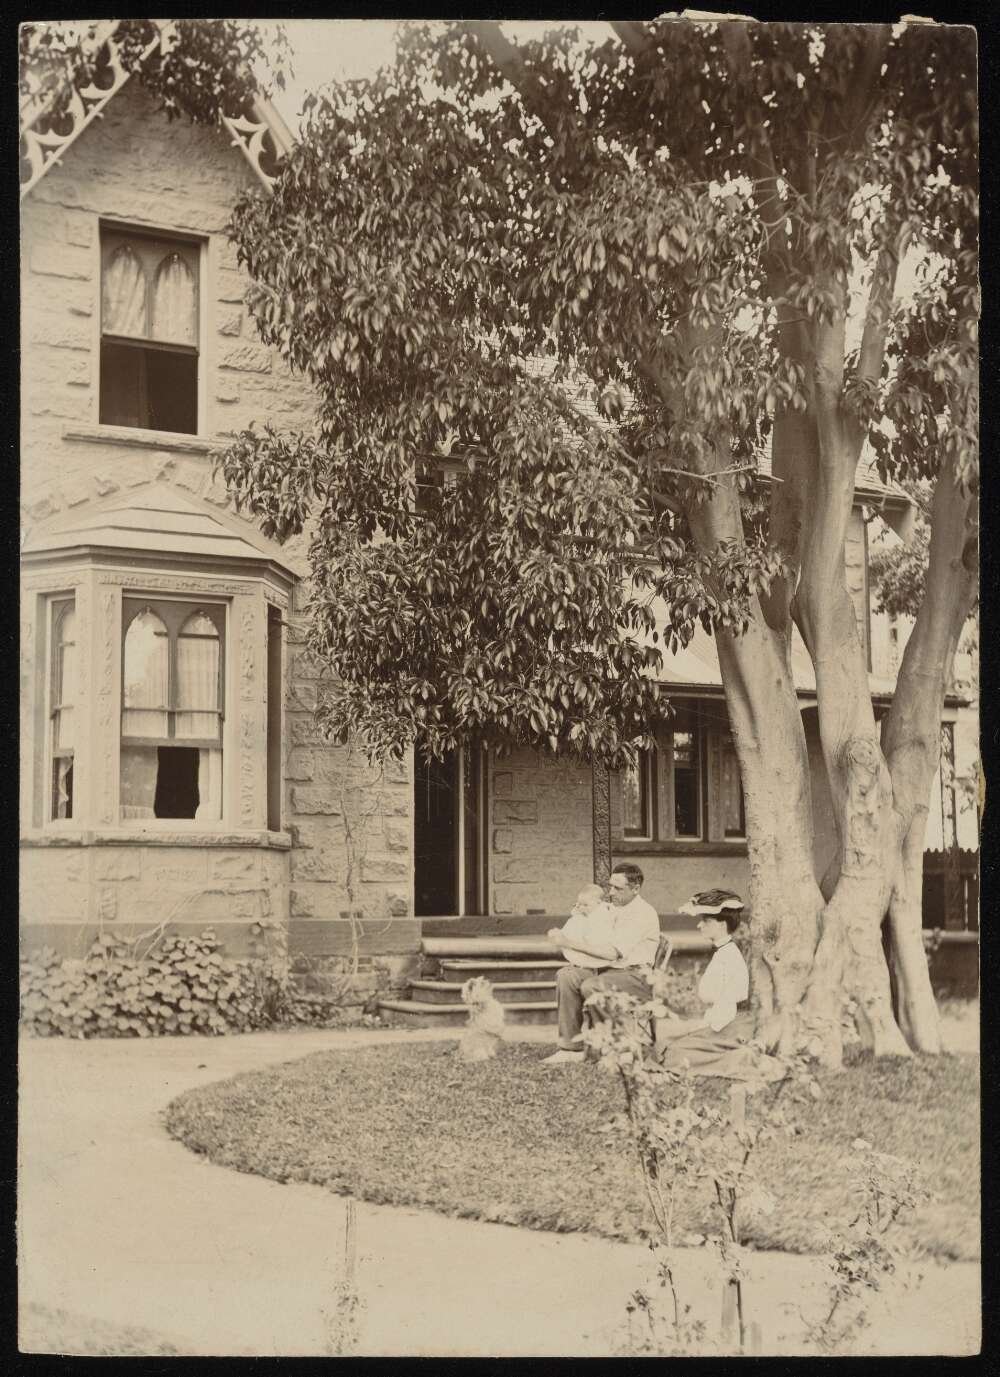 Photograph of a couple and two young children outside a large house